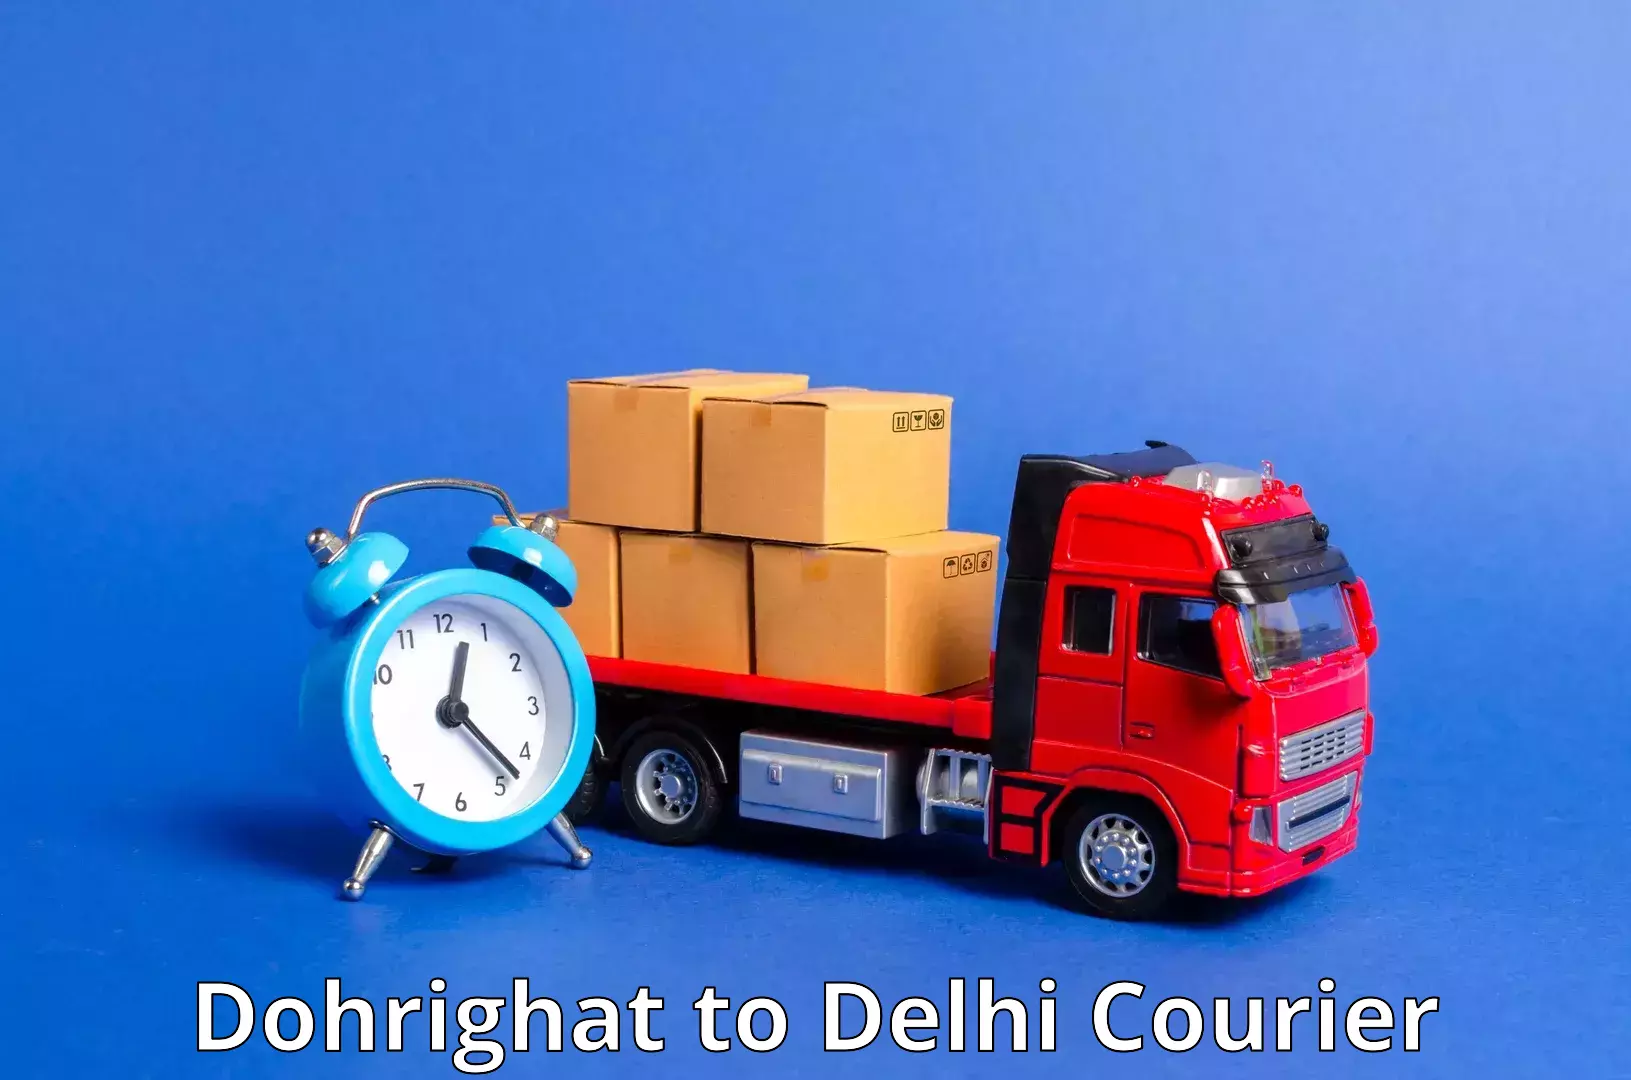 Comprehensive shipping network Dohrighat to Lodhi Road